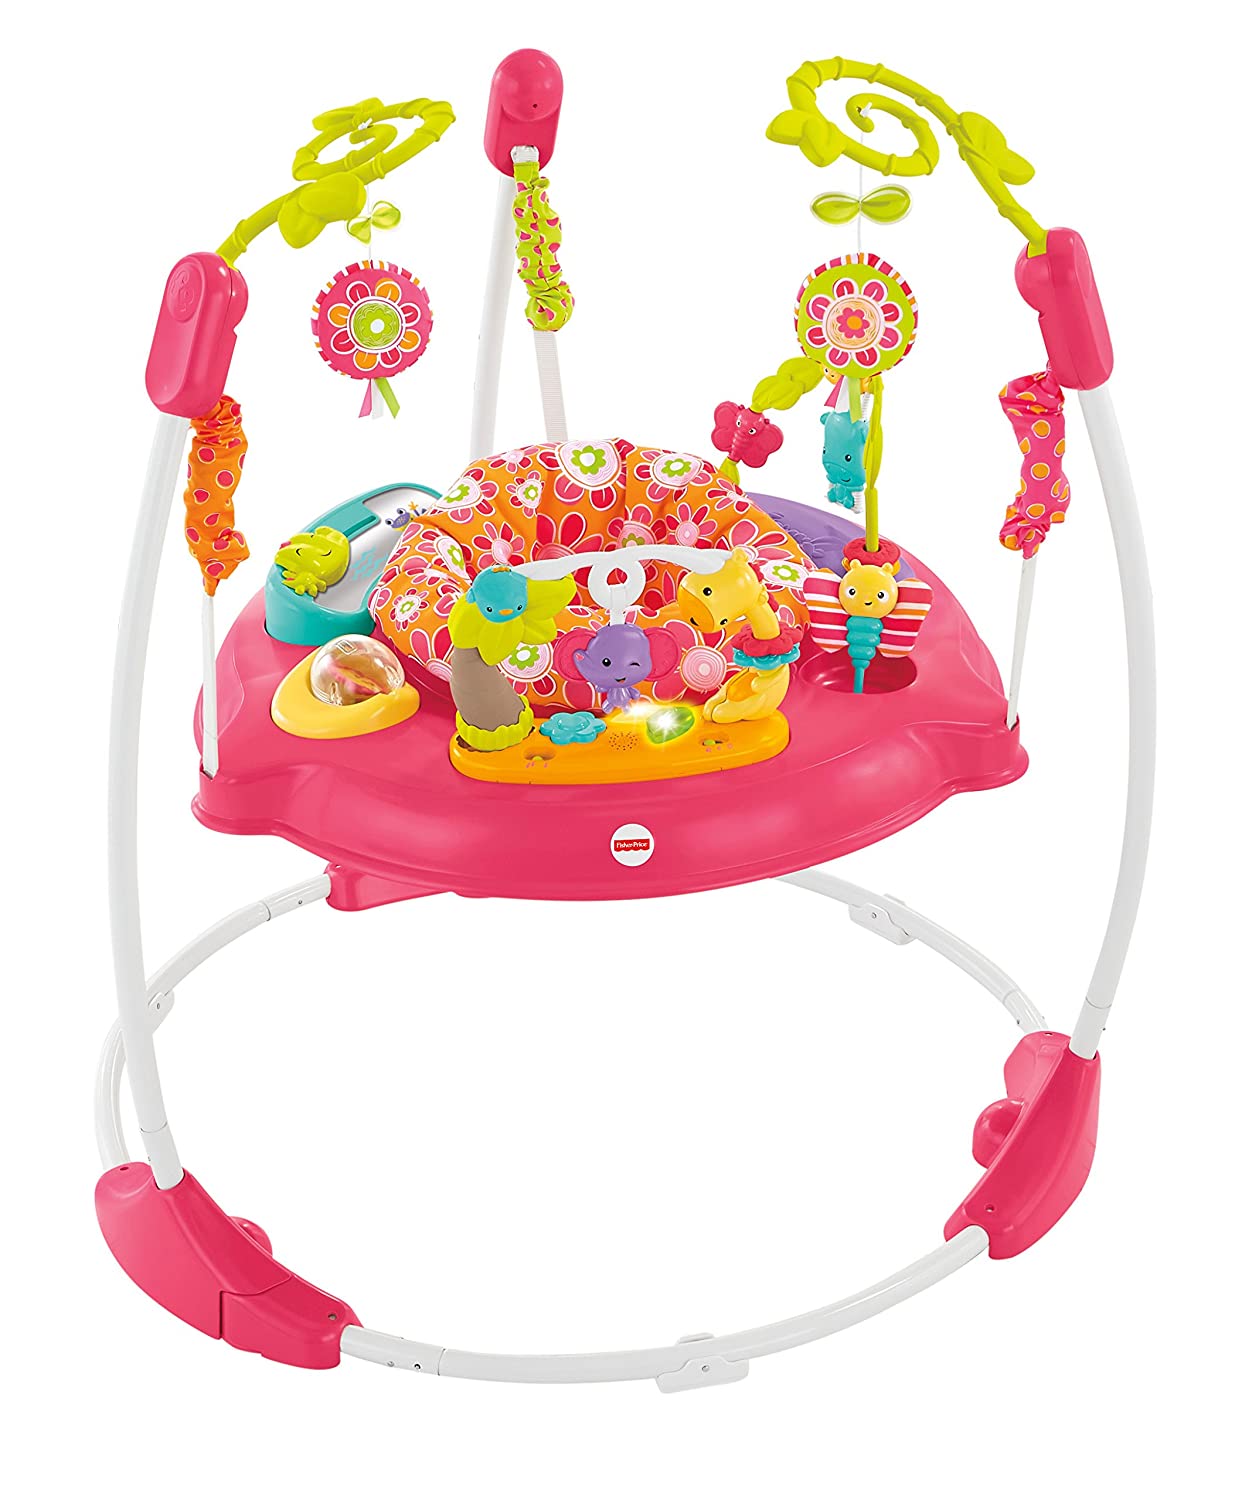 7 Best Fisher Price Jumperoo Reviews in 2022 4